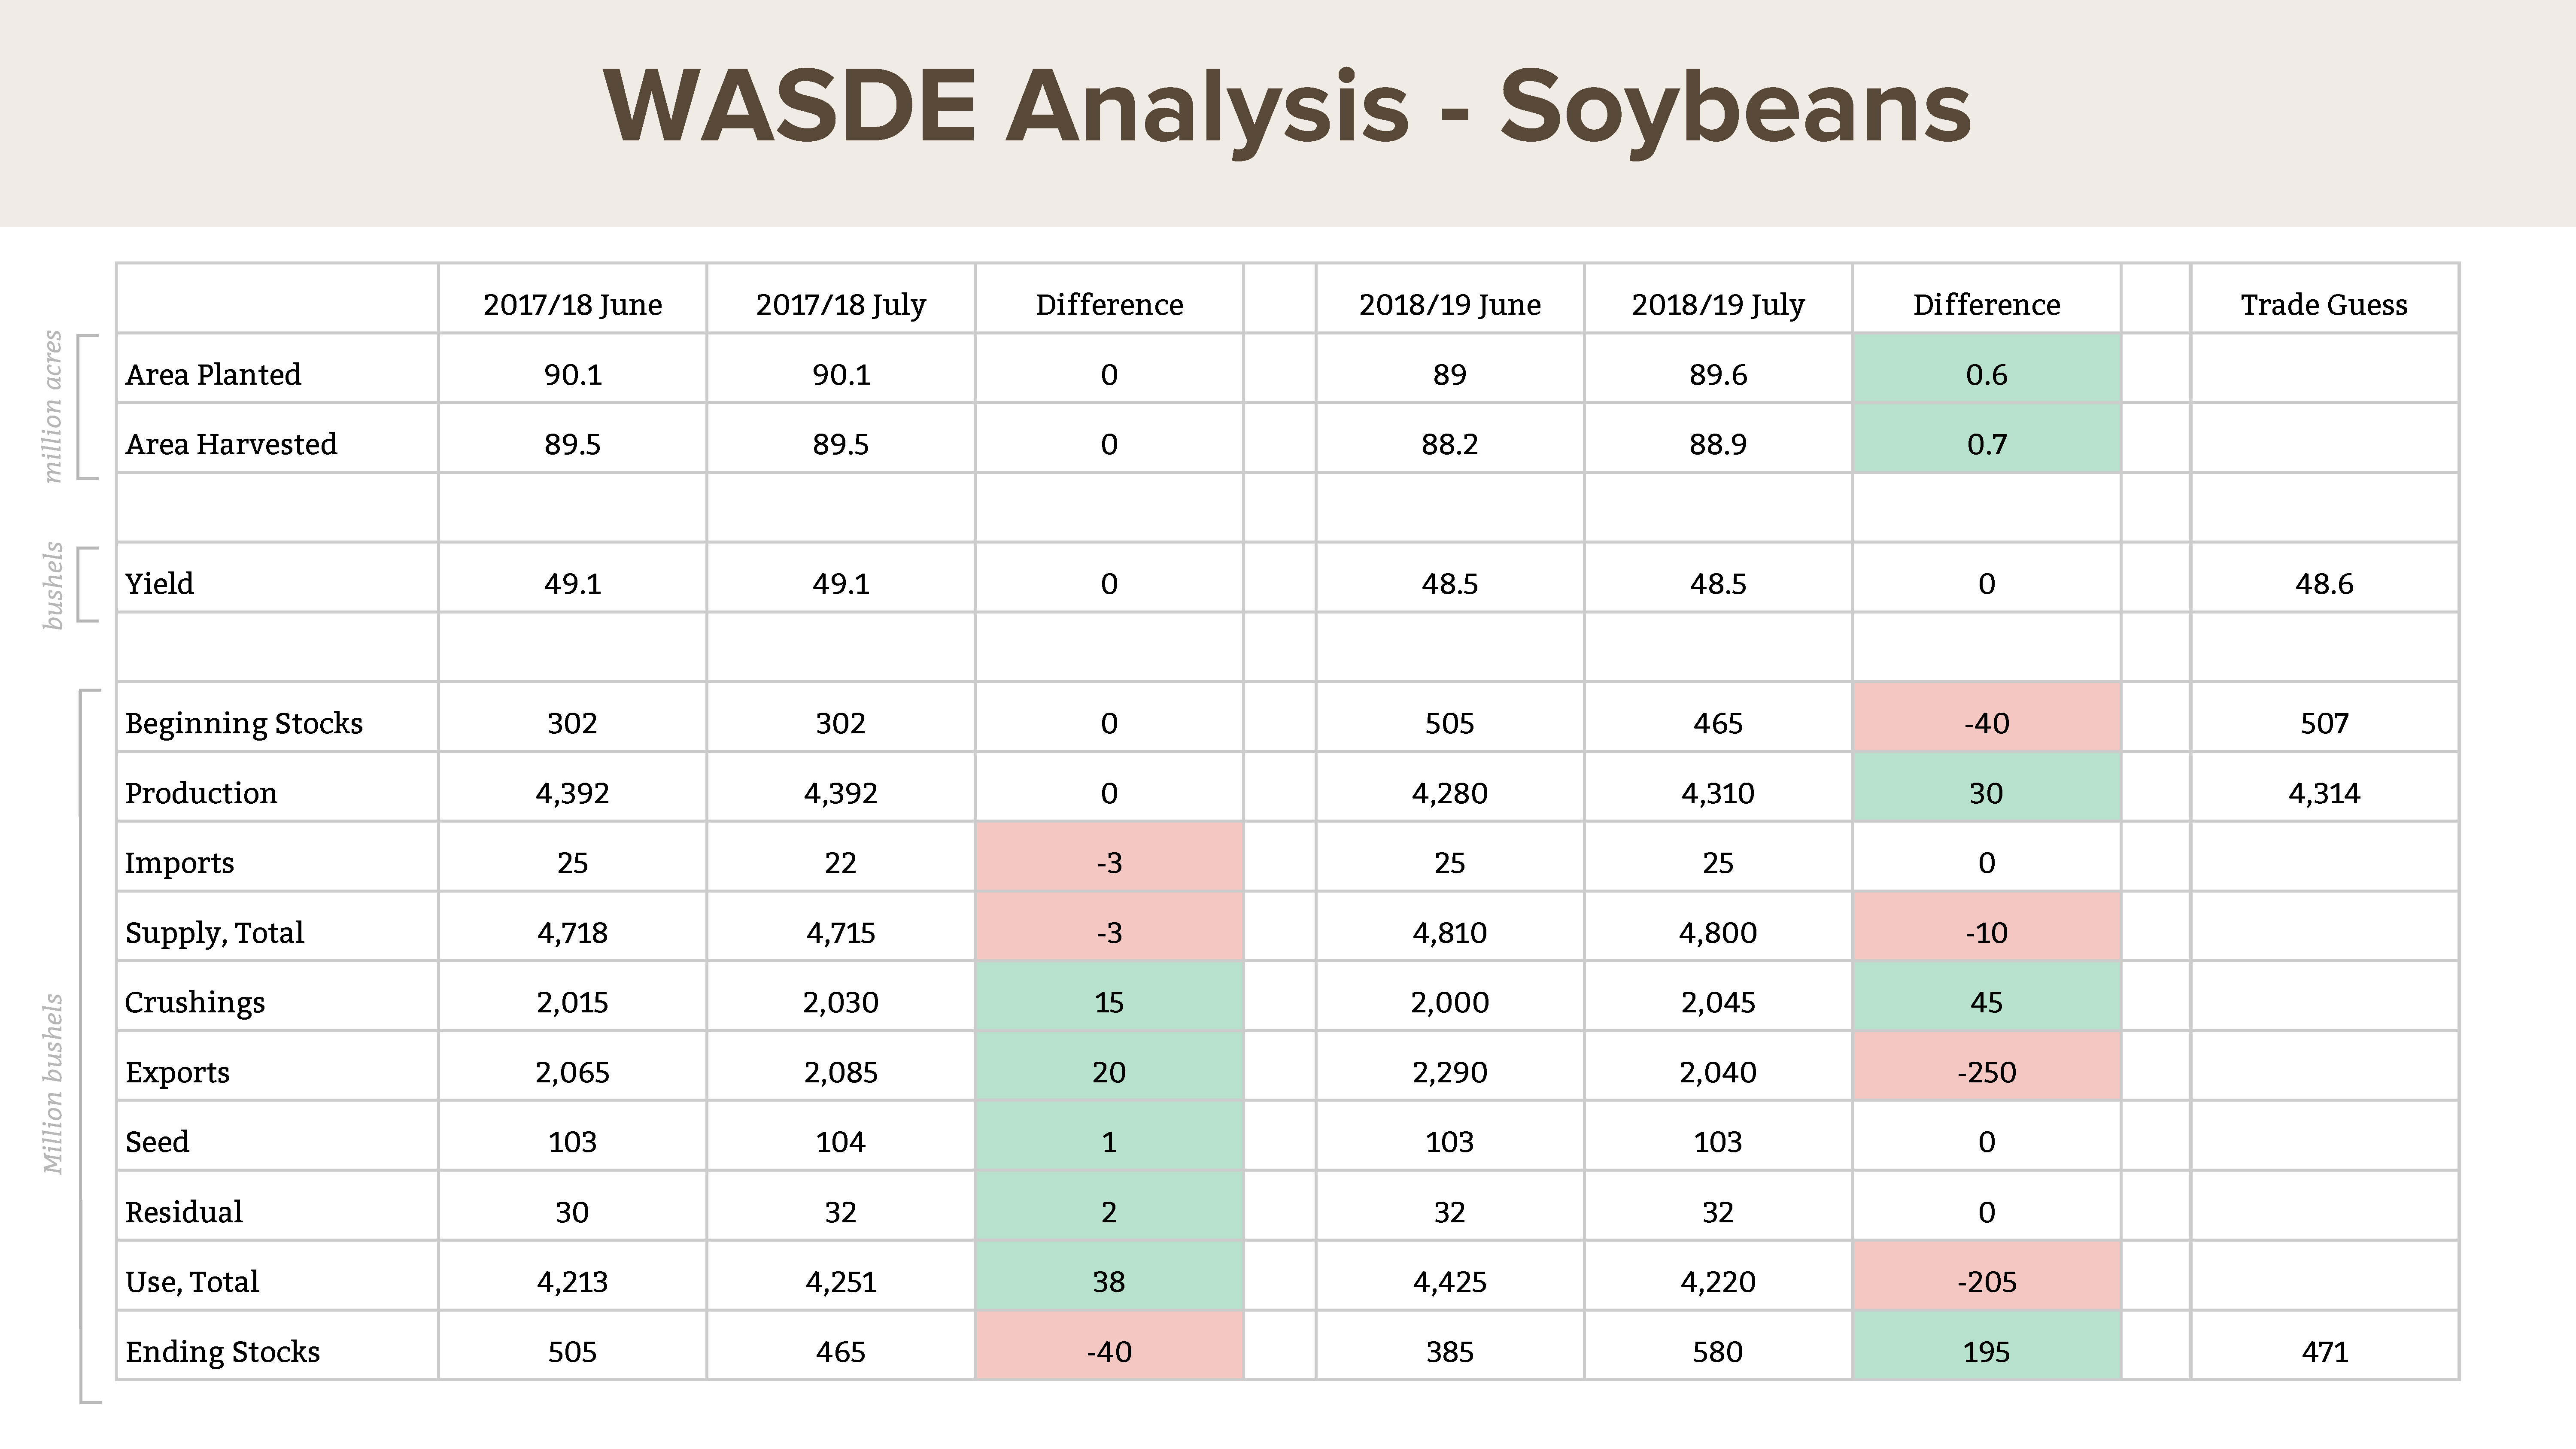 July WASDE: estimated U.S. soybean acres planted, harvested, and yield 